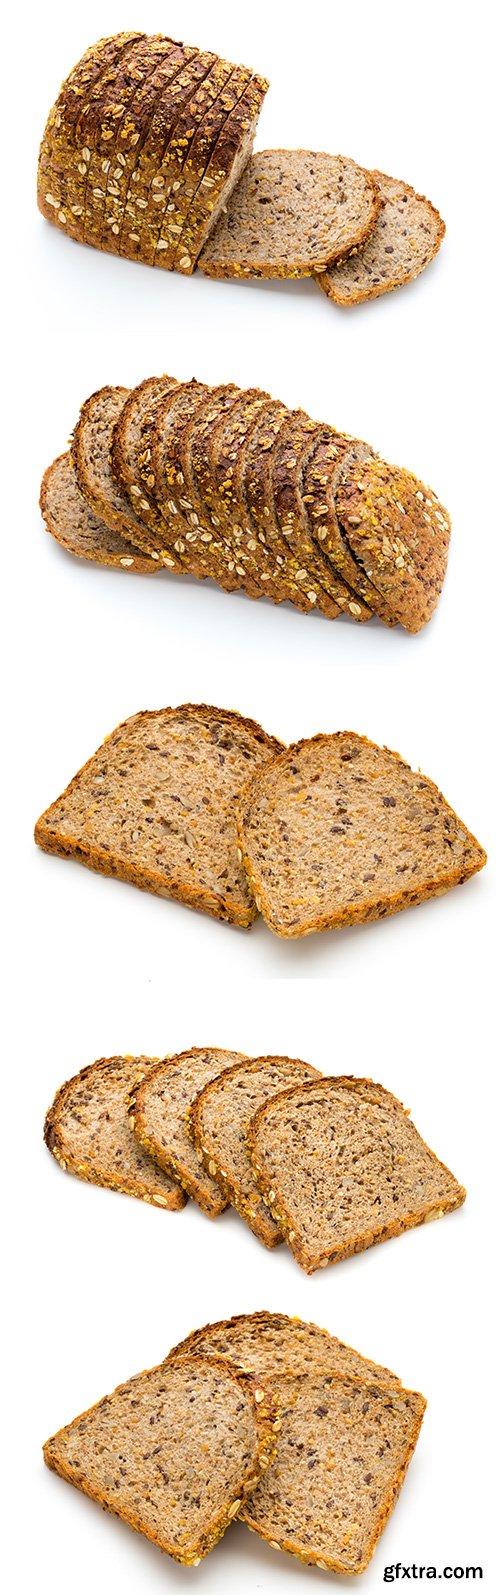 Whole Wheat Bread Isolated - 5xJPGs